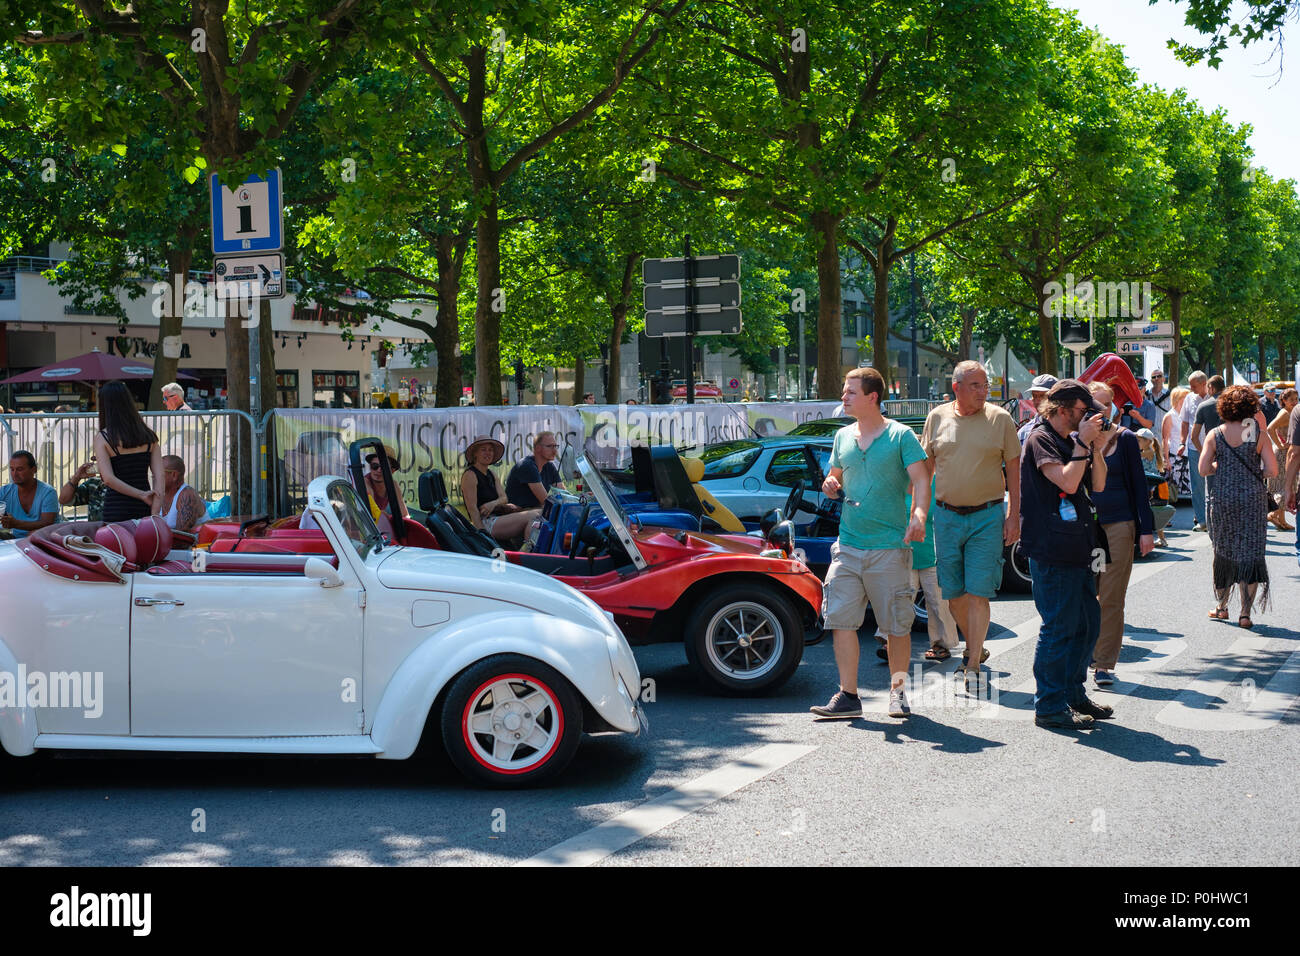 Berlin, Germany - june 09, 2018: People at Berlin Classic Days, a Oldtimer automobile event showing more than 2000 vintage cars and historic vehicles at Kurfuerstendamm / Kudamm in Berlin Credit: hanohiki/Alamy Live News Stock Photo